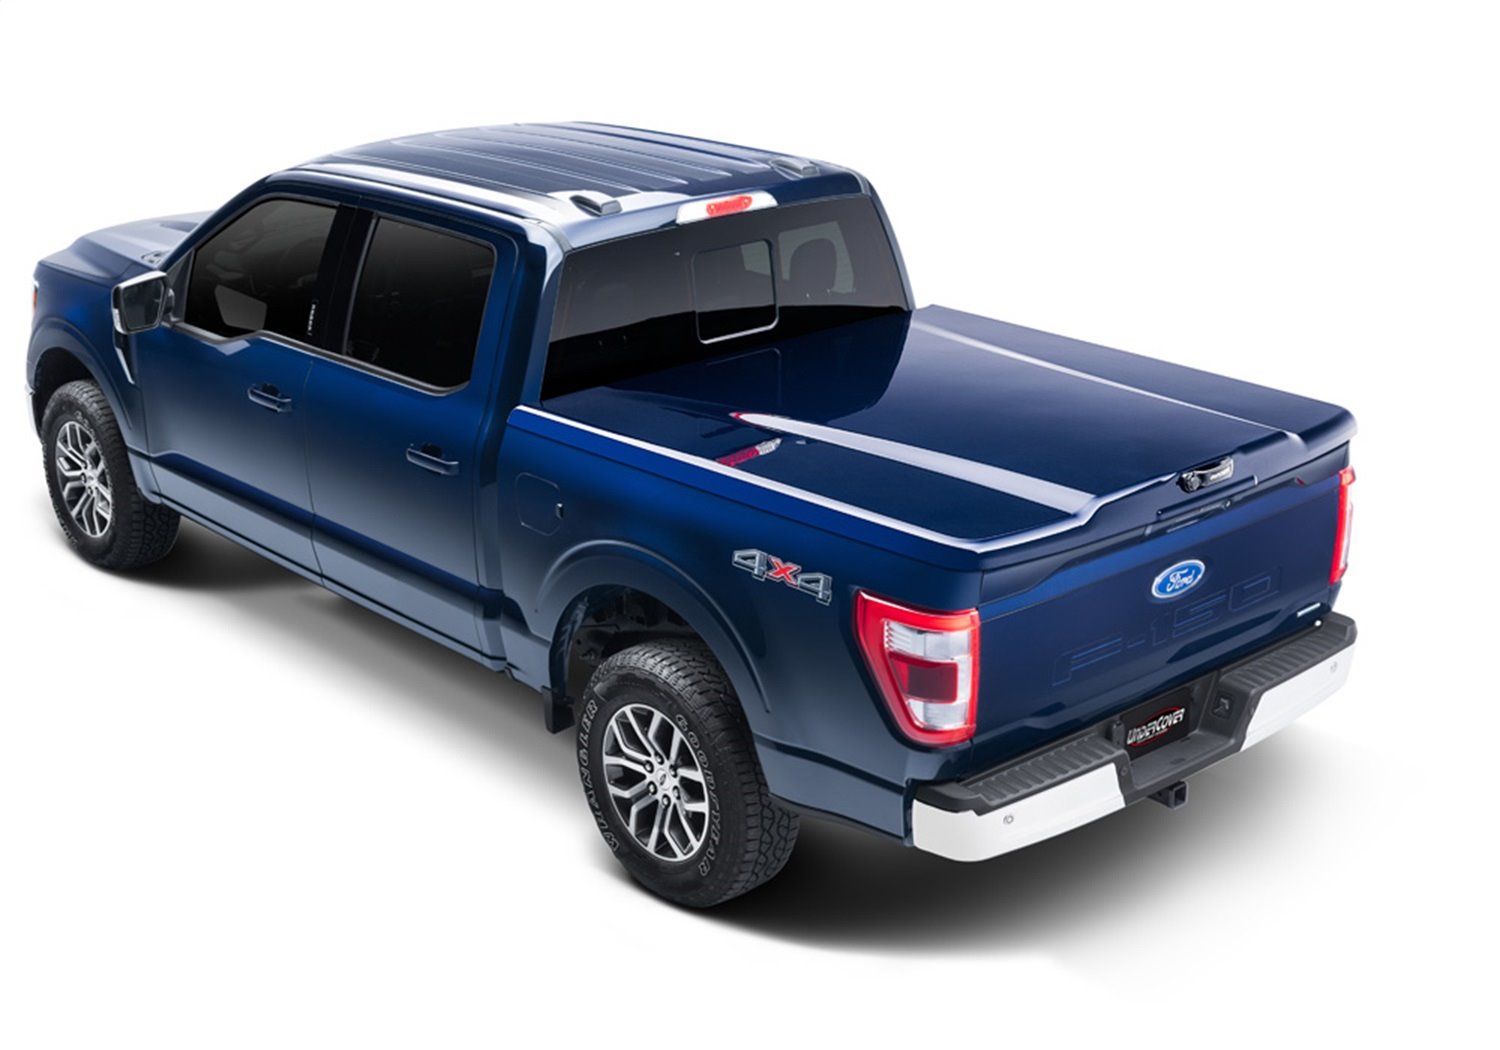 UC2208L-PQ Elite LX Hard Non-Folding Cover, Fits Select Ford F-150 5'7" Bed Crew (Includes Lightning) PQ Race Red